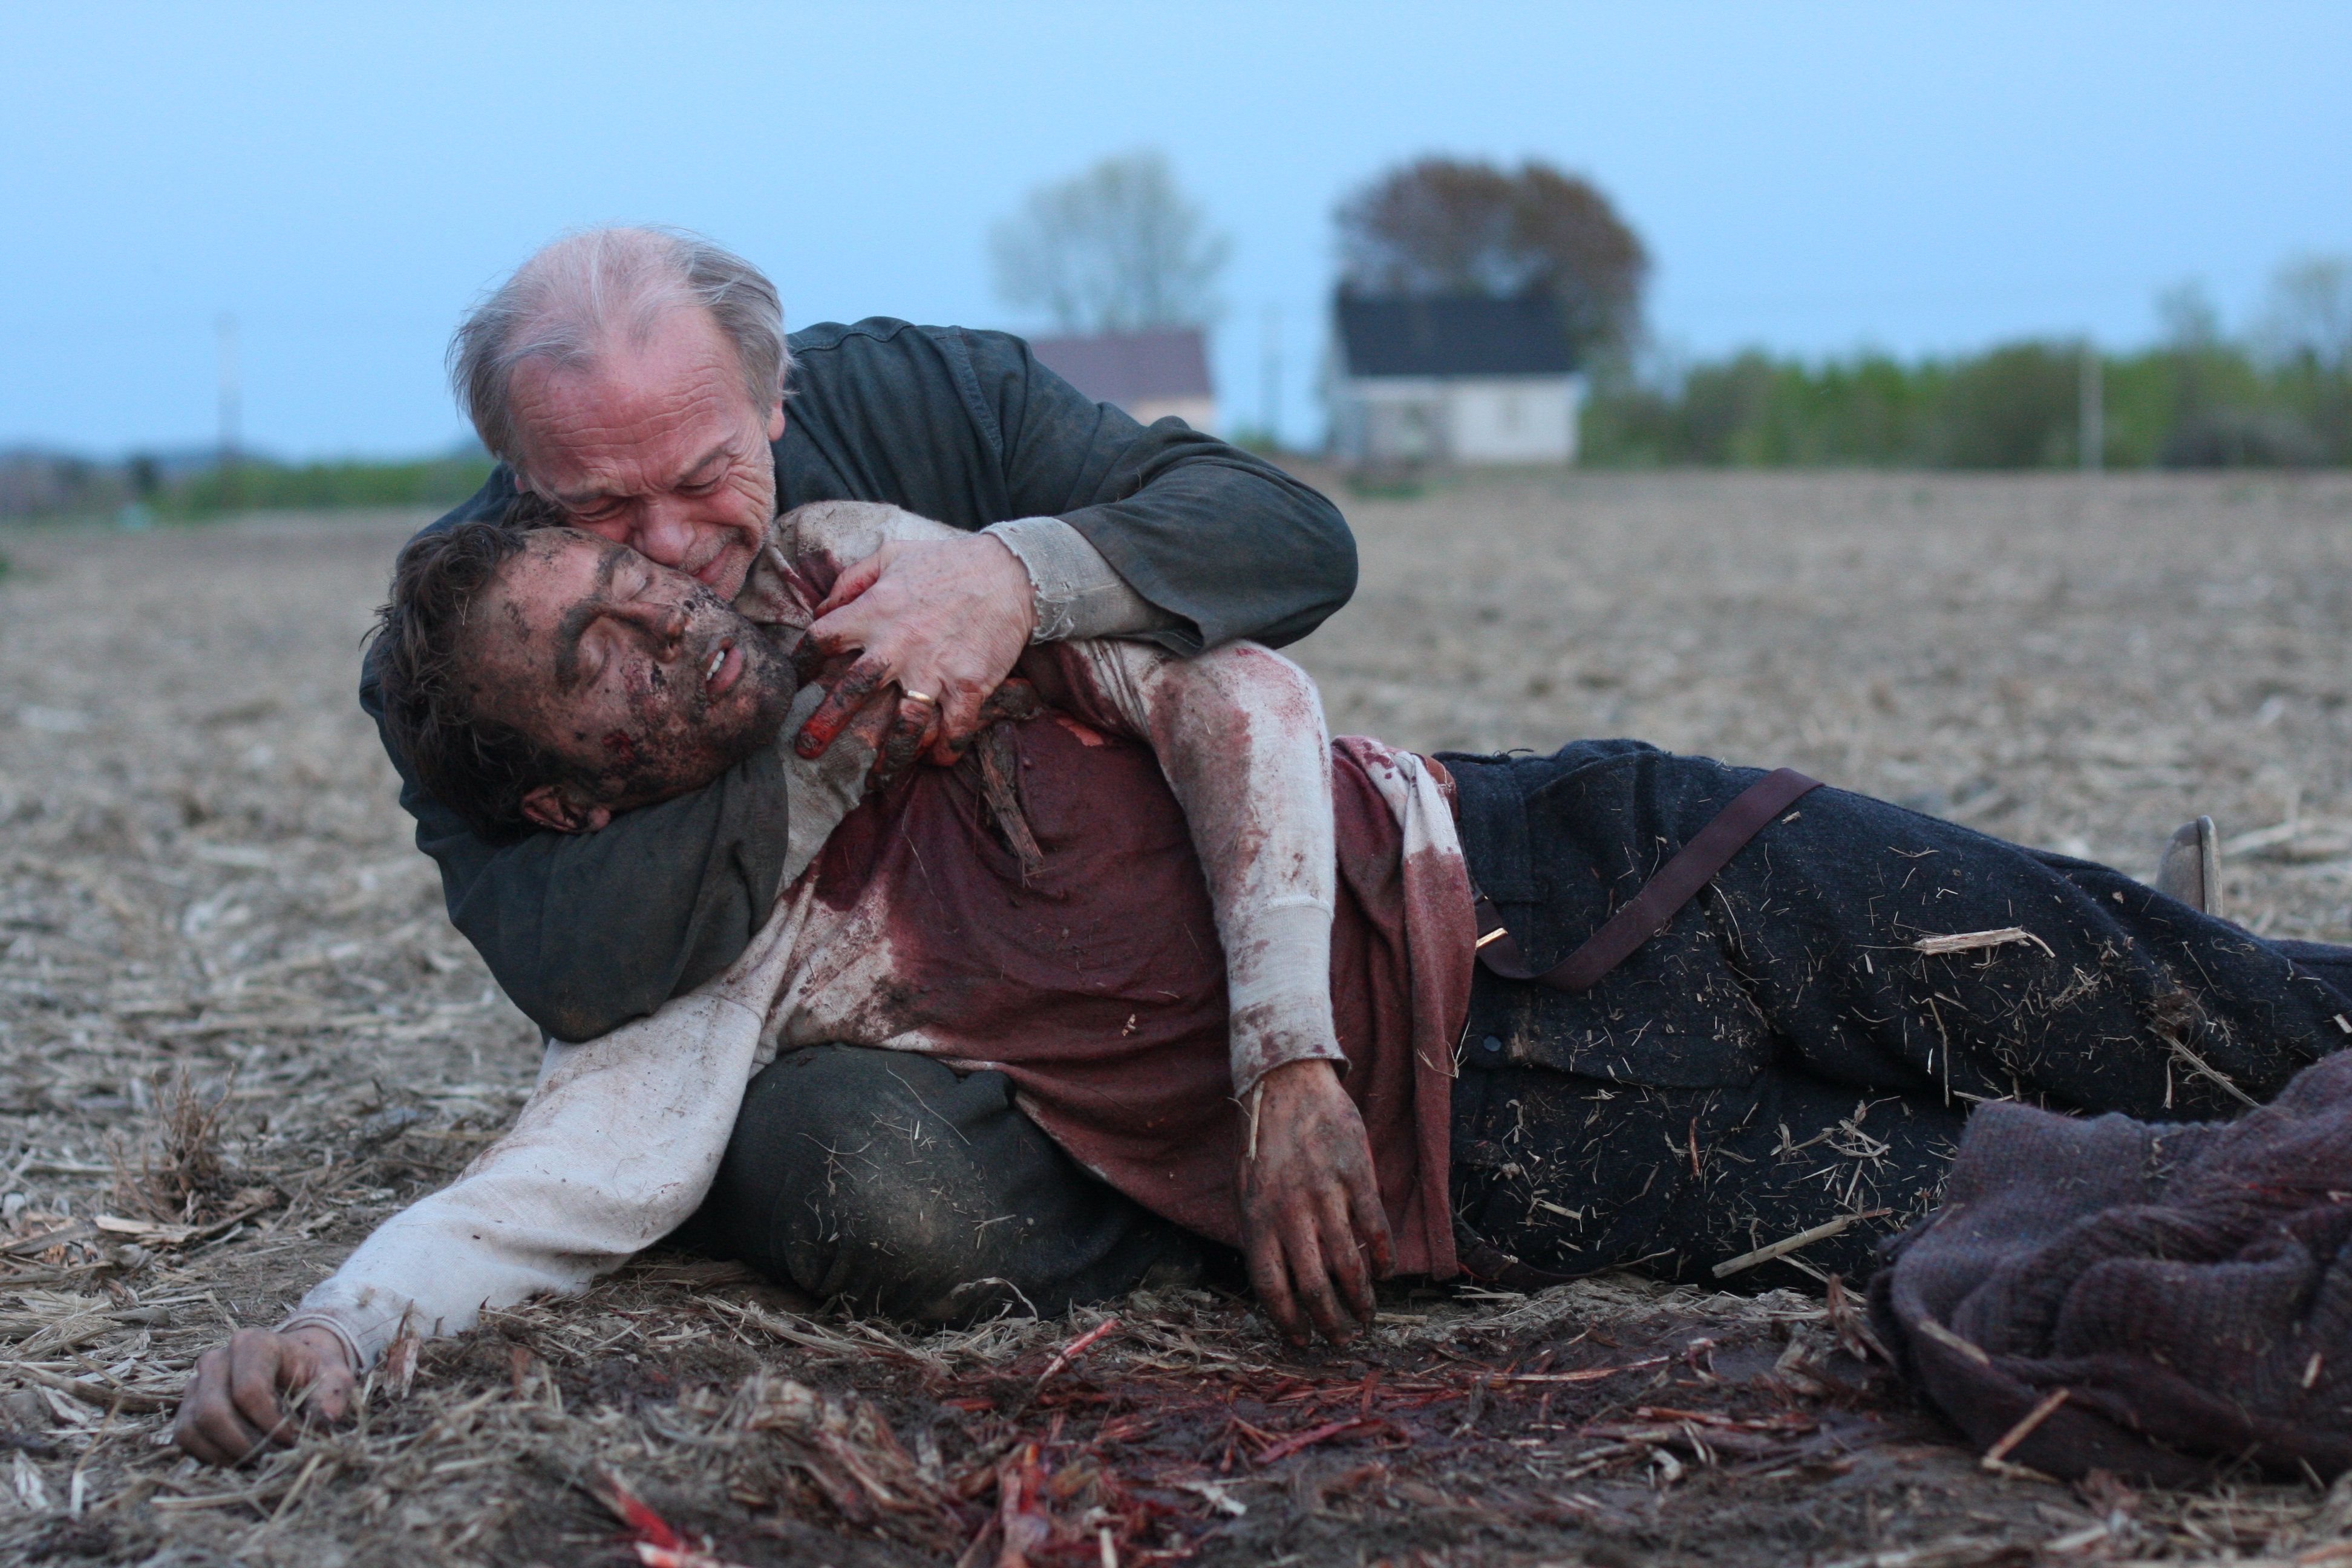 Raymond Cloutier and Emile Proulx-Cloutier in LE DESERTEUR (2008)